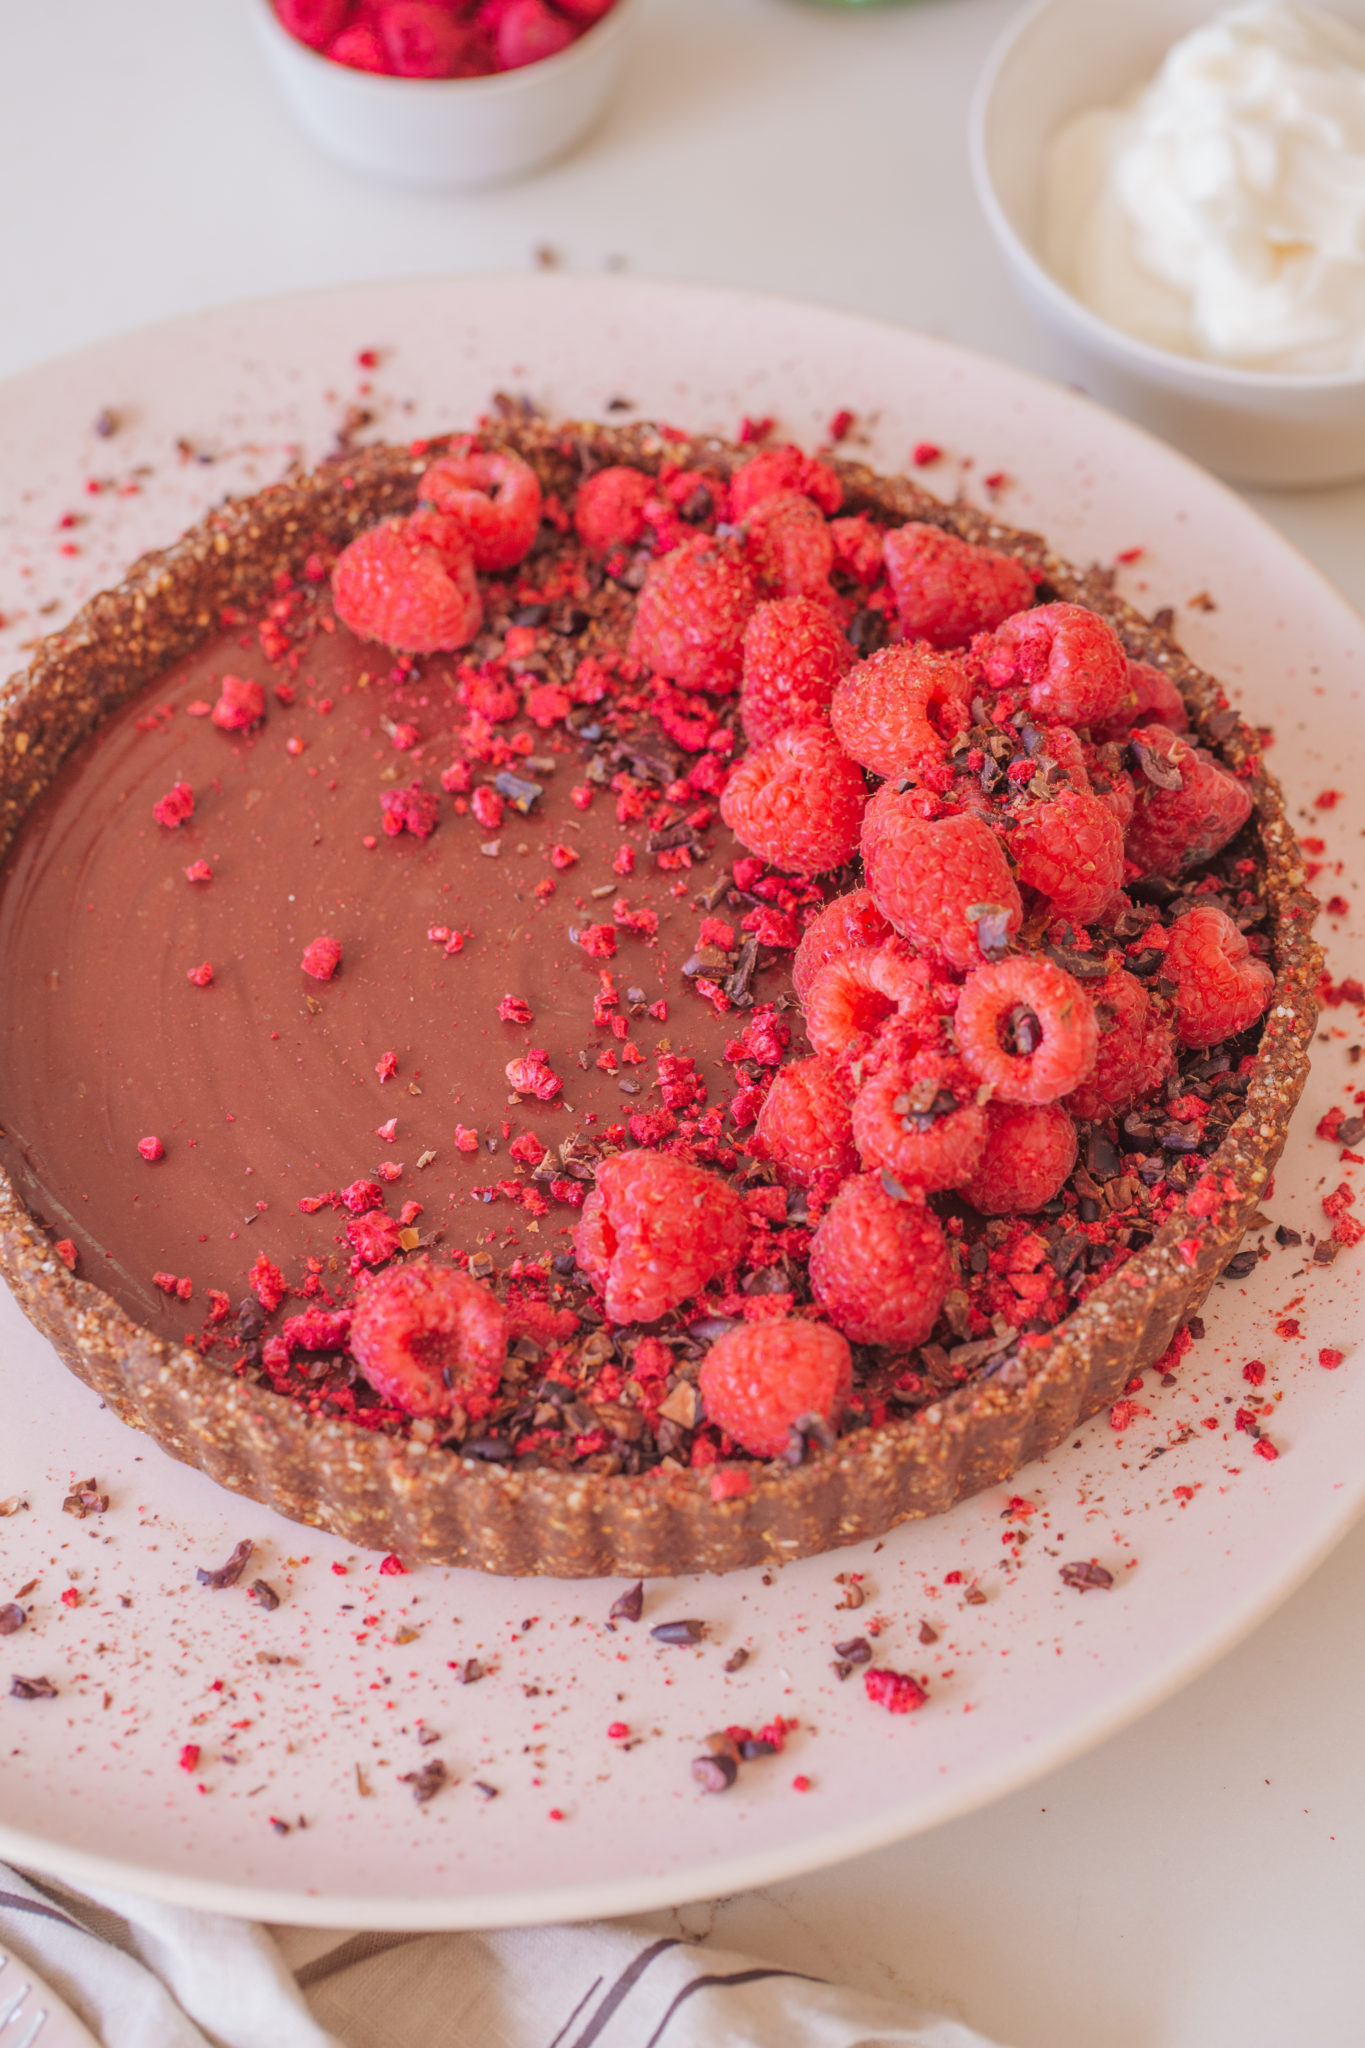 Top down of Chocolate Raspberry Tart, covered in raspberries, cacao nibs on large pink plate